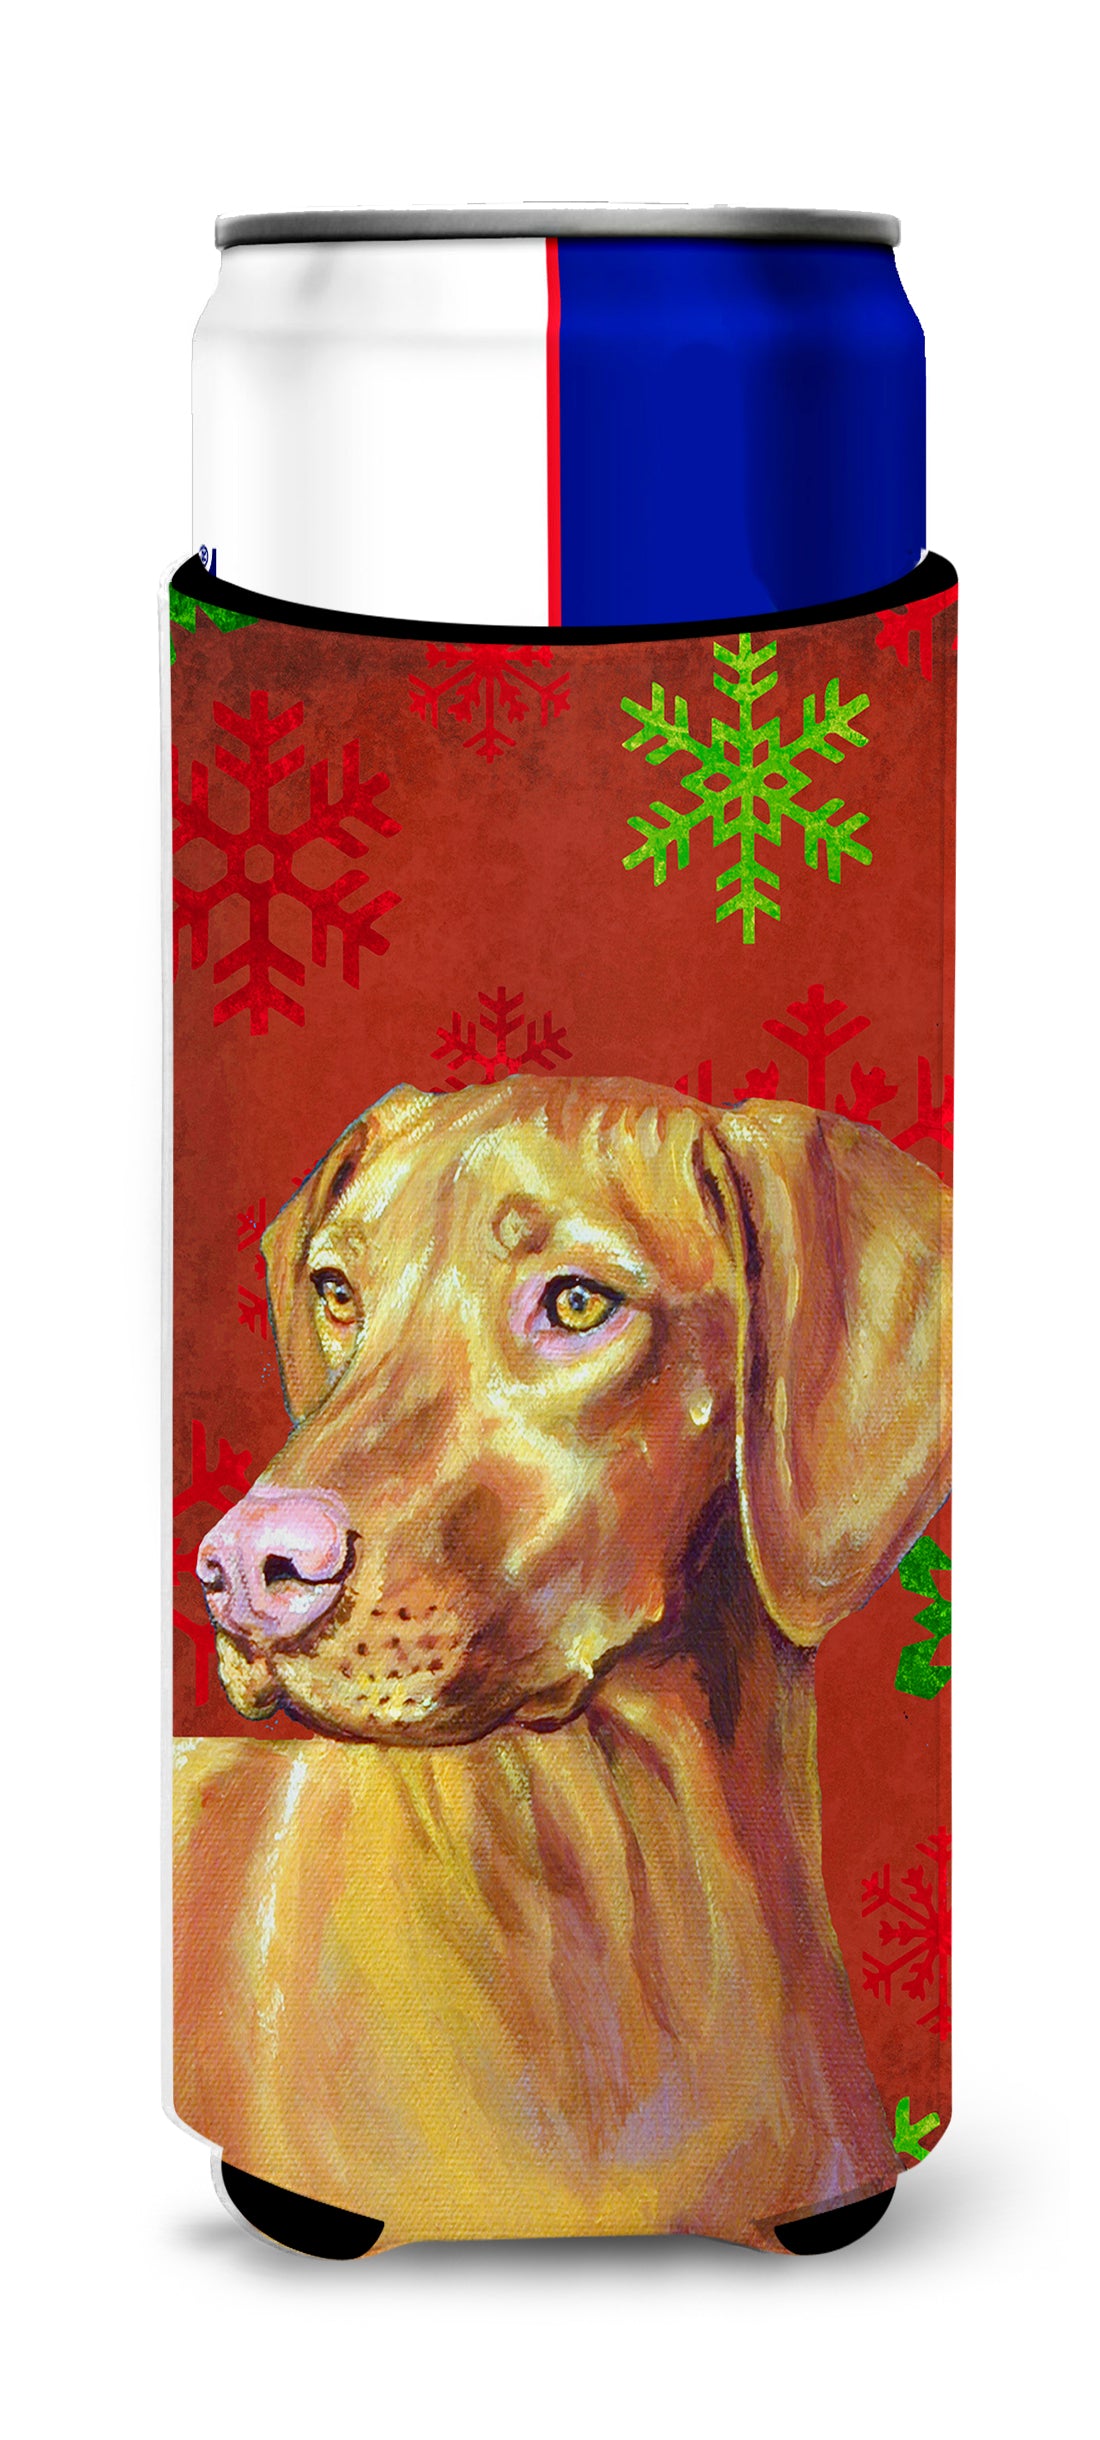 Vizsla Red and Green Snowflakes Holiday Christmas Ultra Beverage Insulators for slim cans LH9325MUK